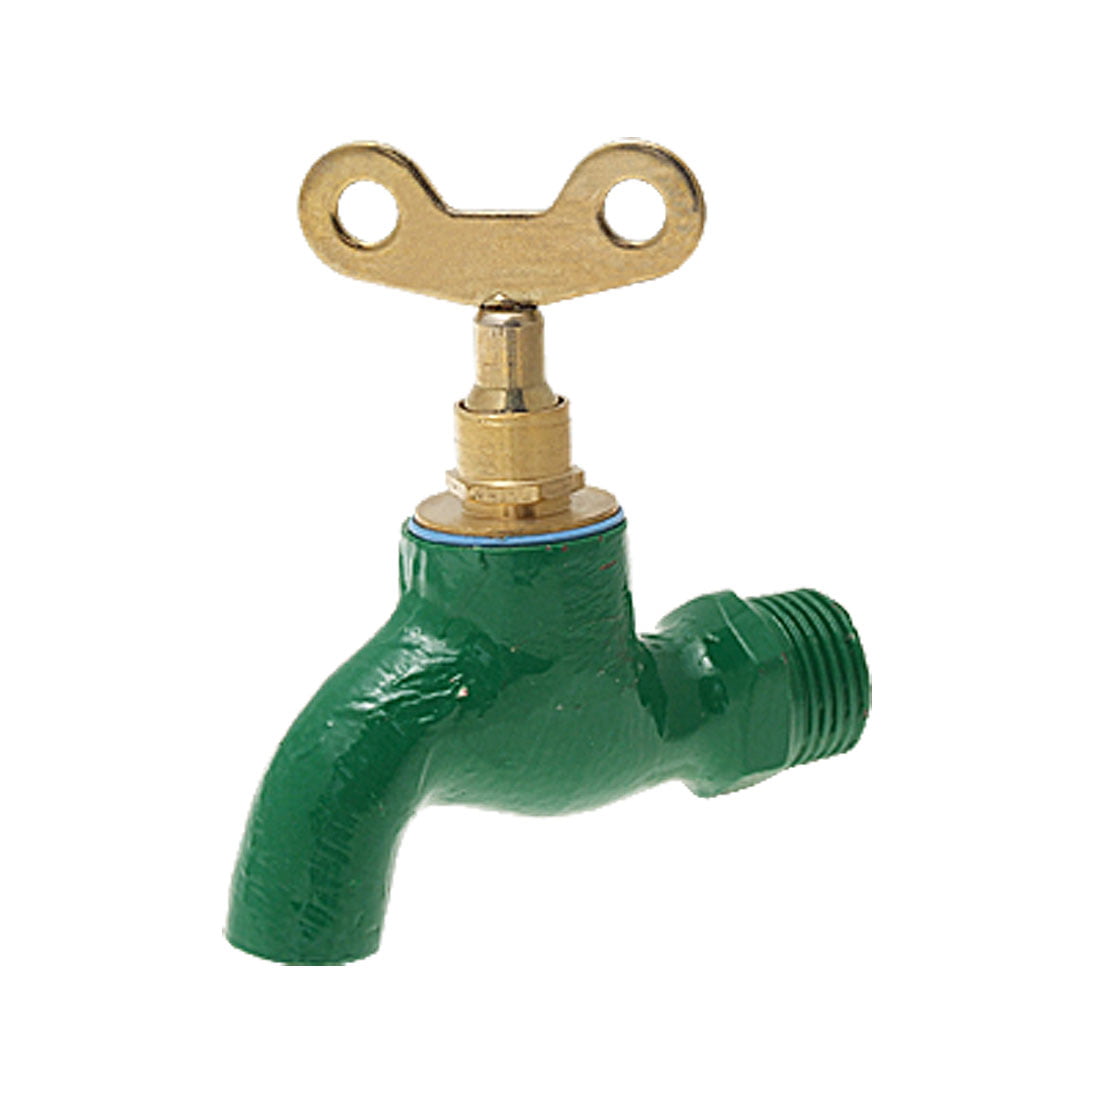 Unique Bargains Water Faucet Green Home Kitchen Metal Tap With